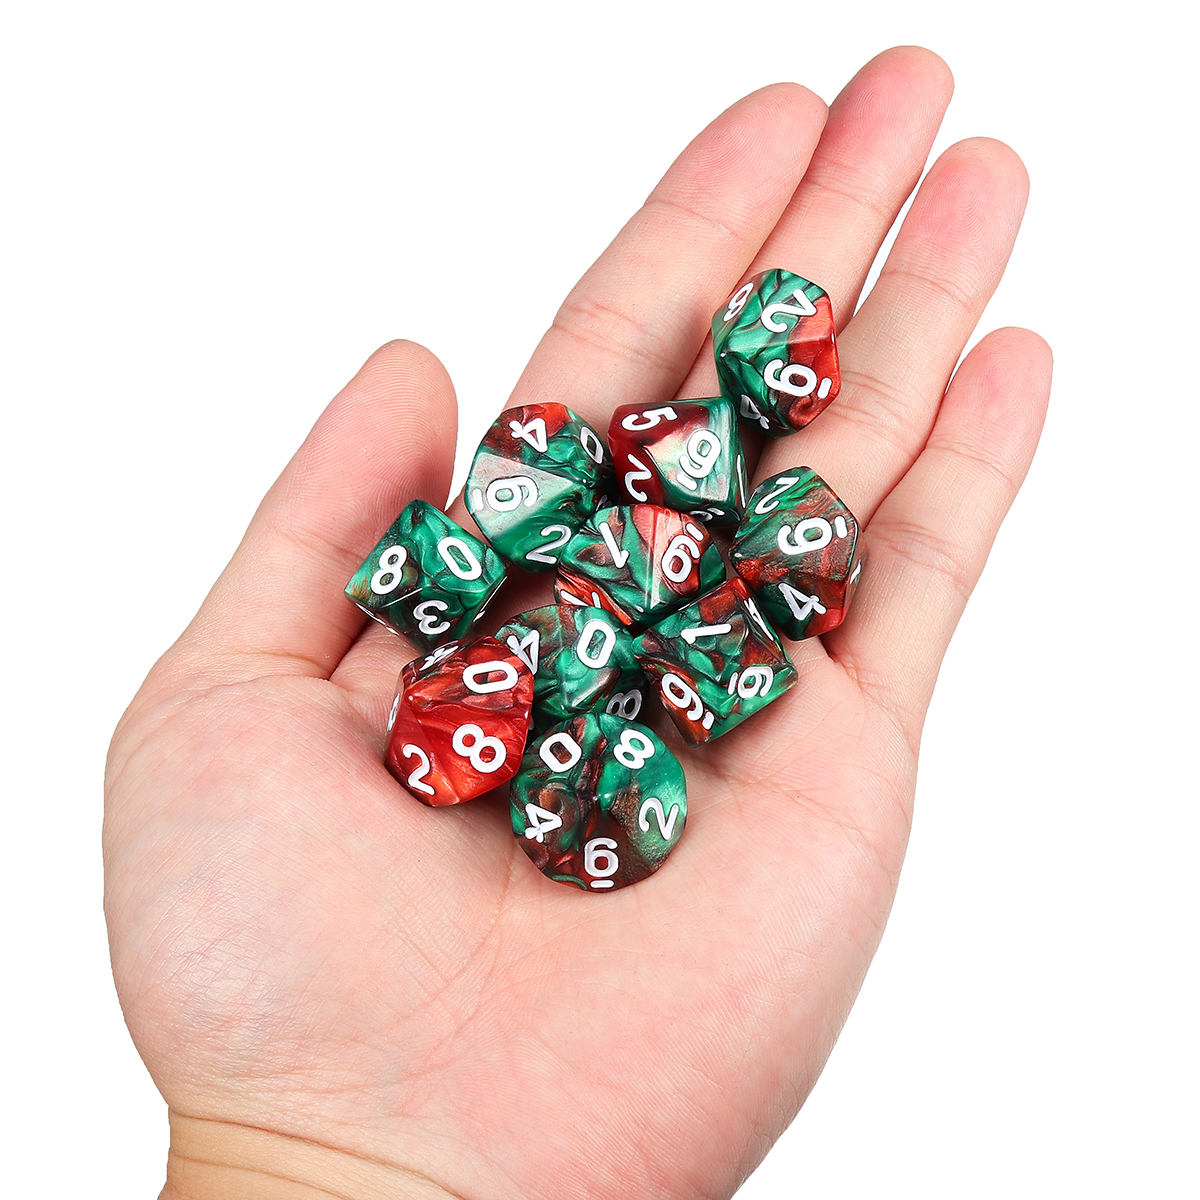 10pcs-10-Sided-Dice-D10-Polyhedral-Dice-RPG-Role-Playing-Game-Dices-w-bag-1351752-7